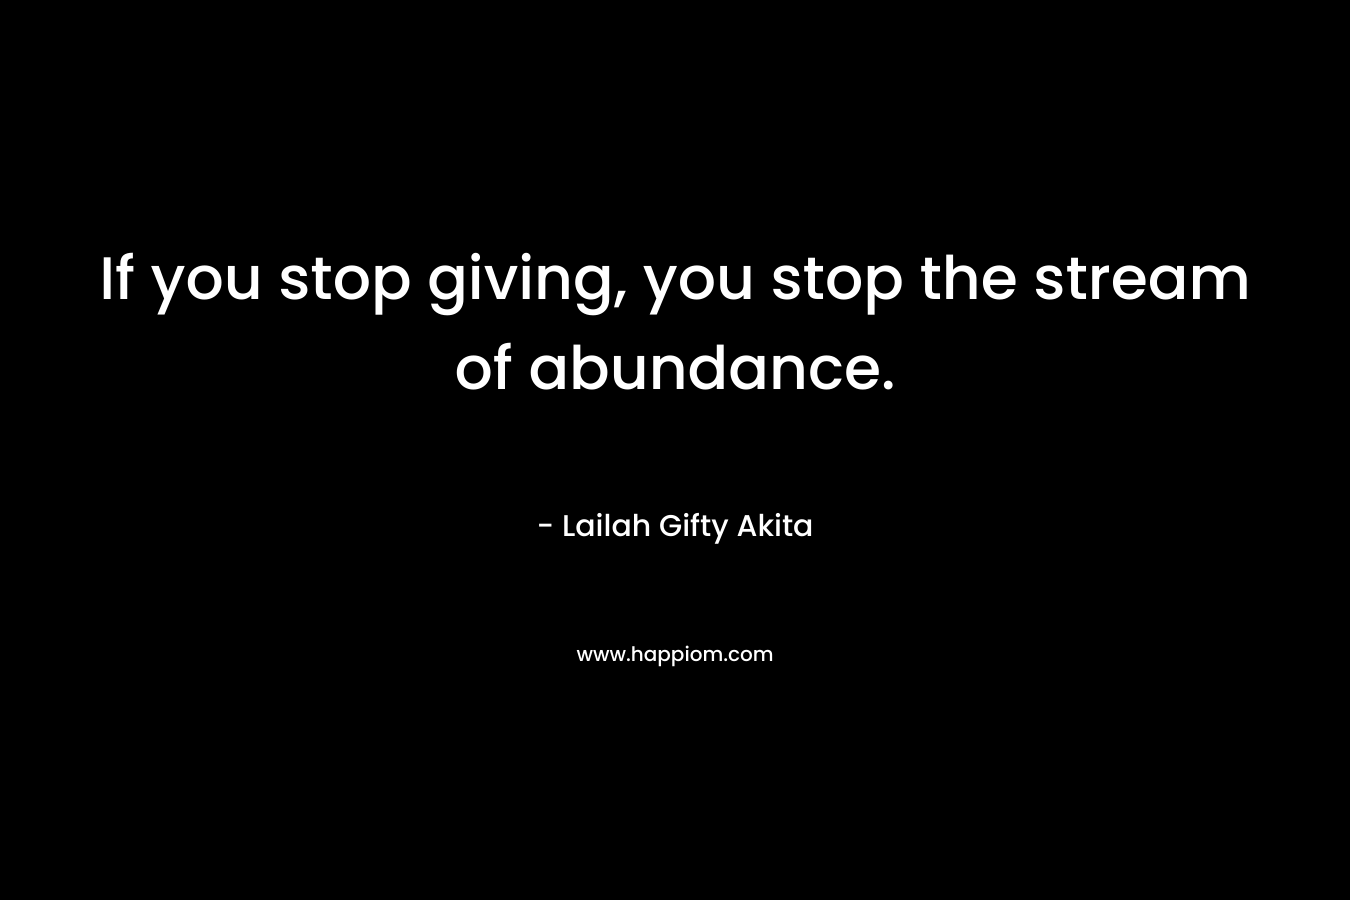 If you stop giving, you stop the stream of abundance.